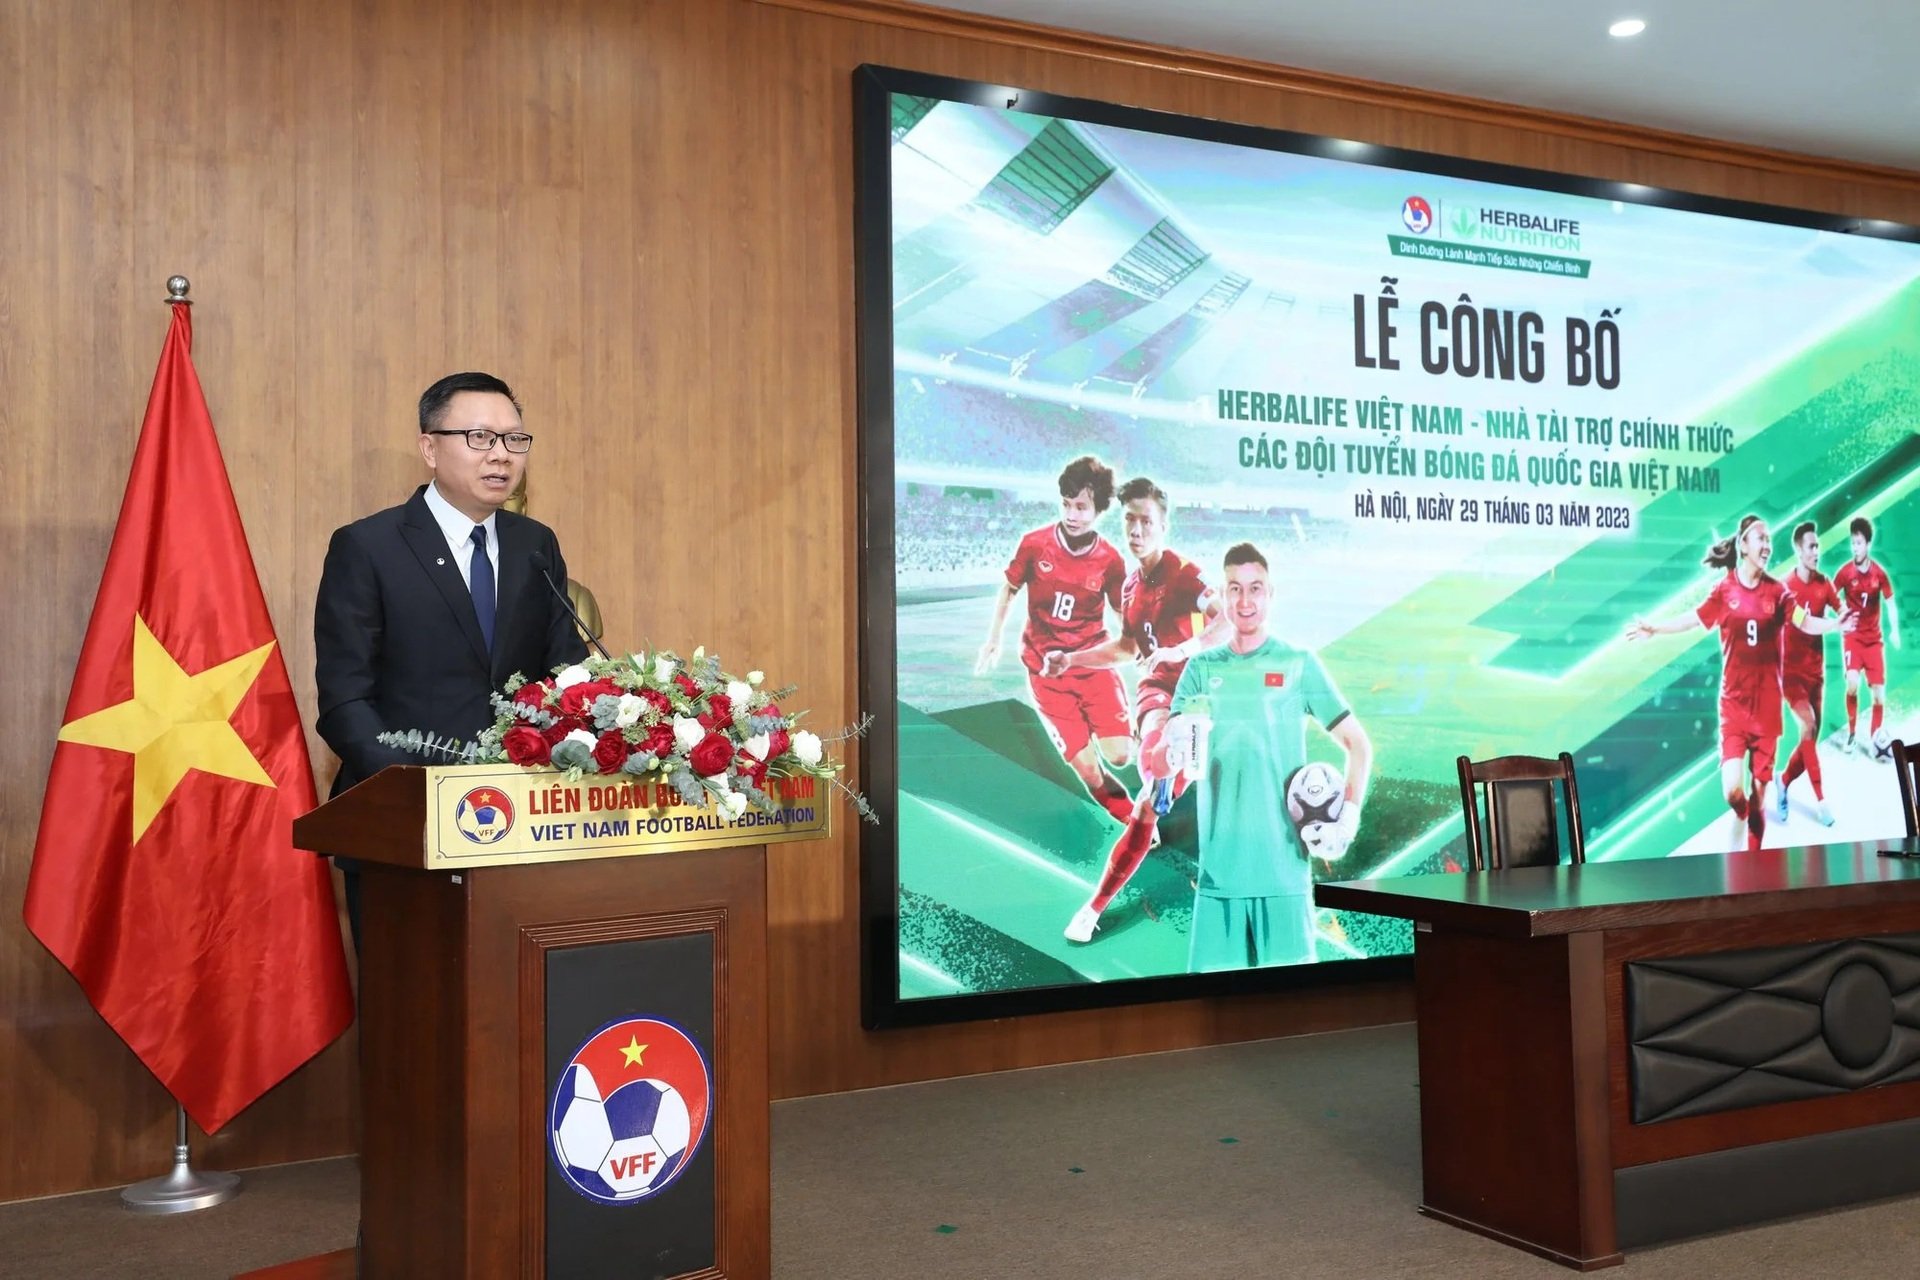 Herbalife is an official sponsor of Vietnam's national football team. Photo courtesy of Nguoi Lao Dong (Laborer) newspaper.